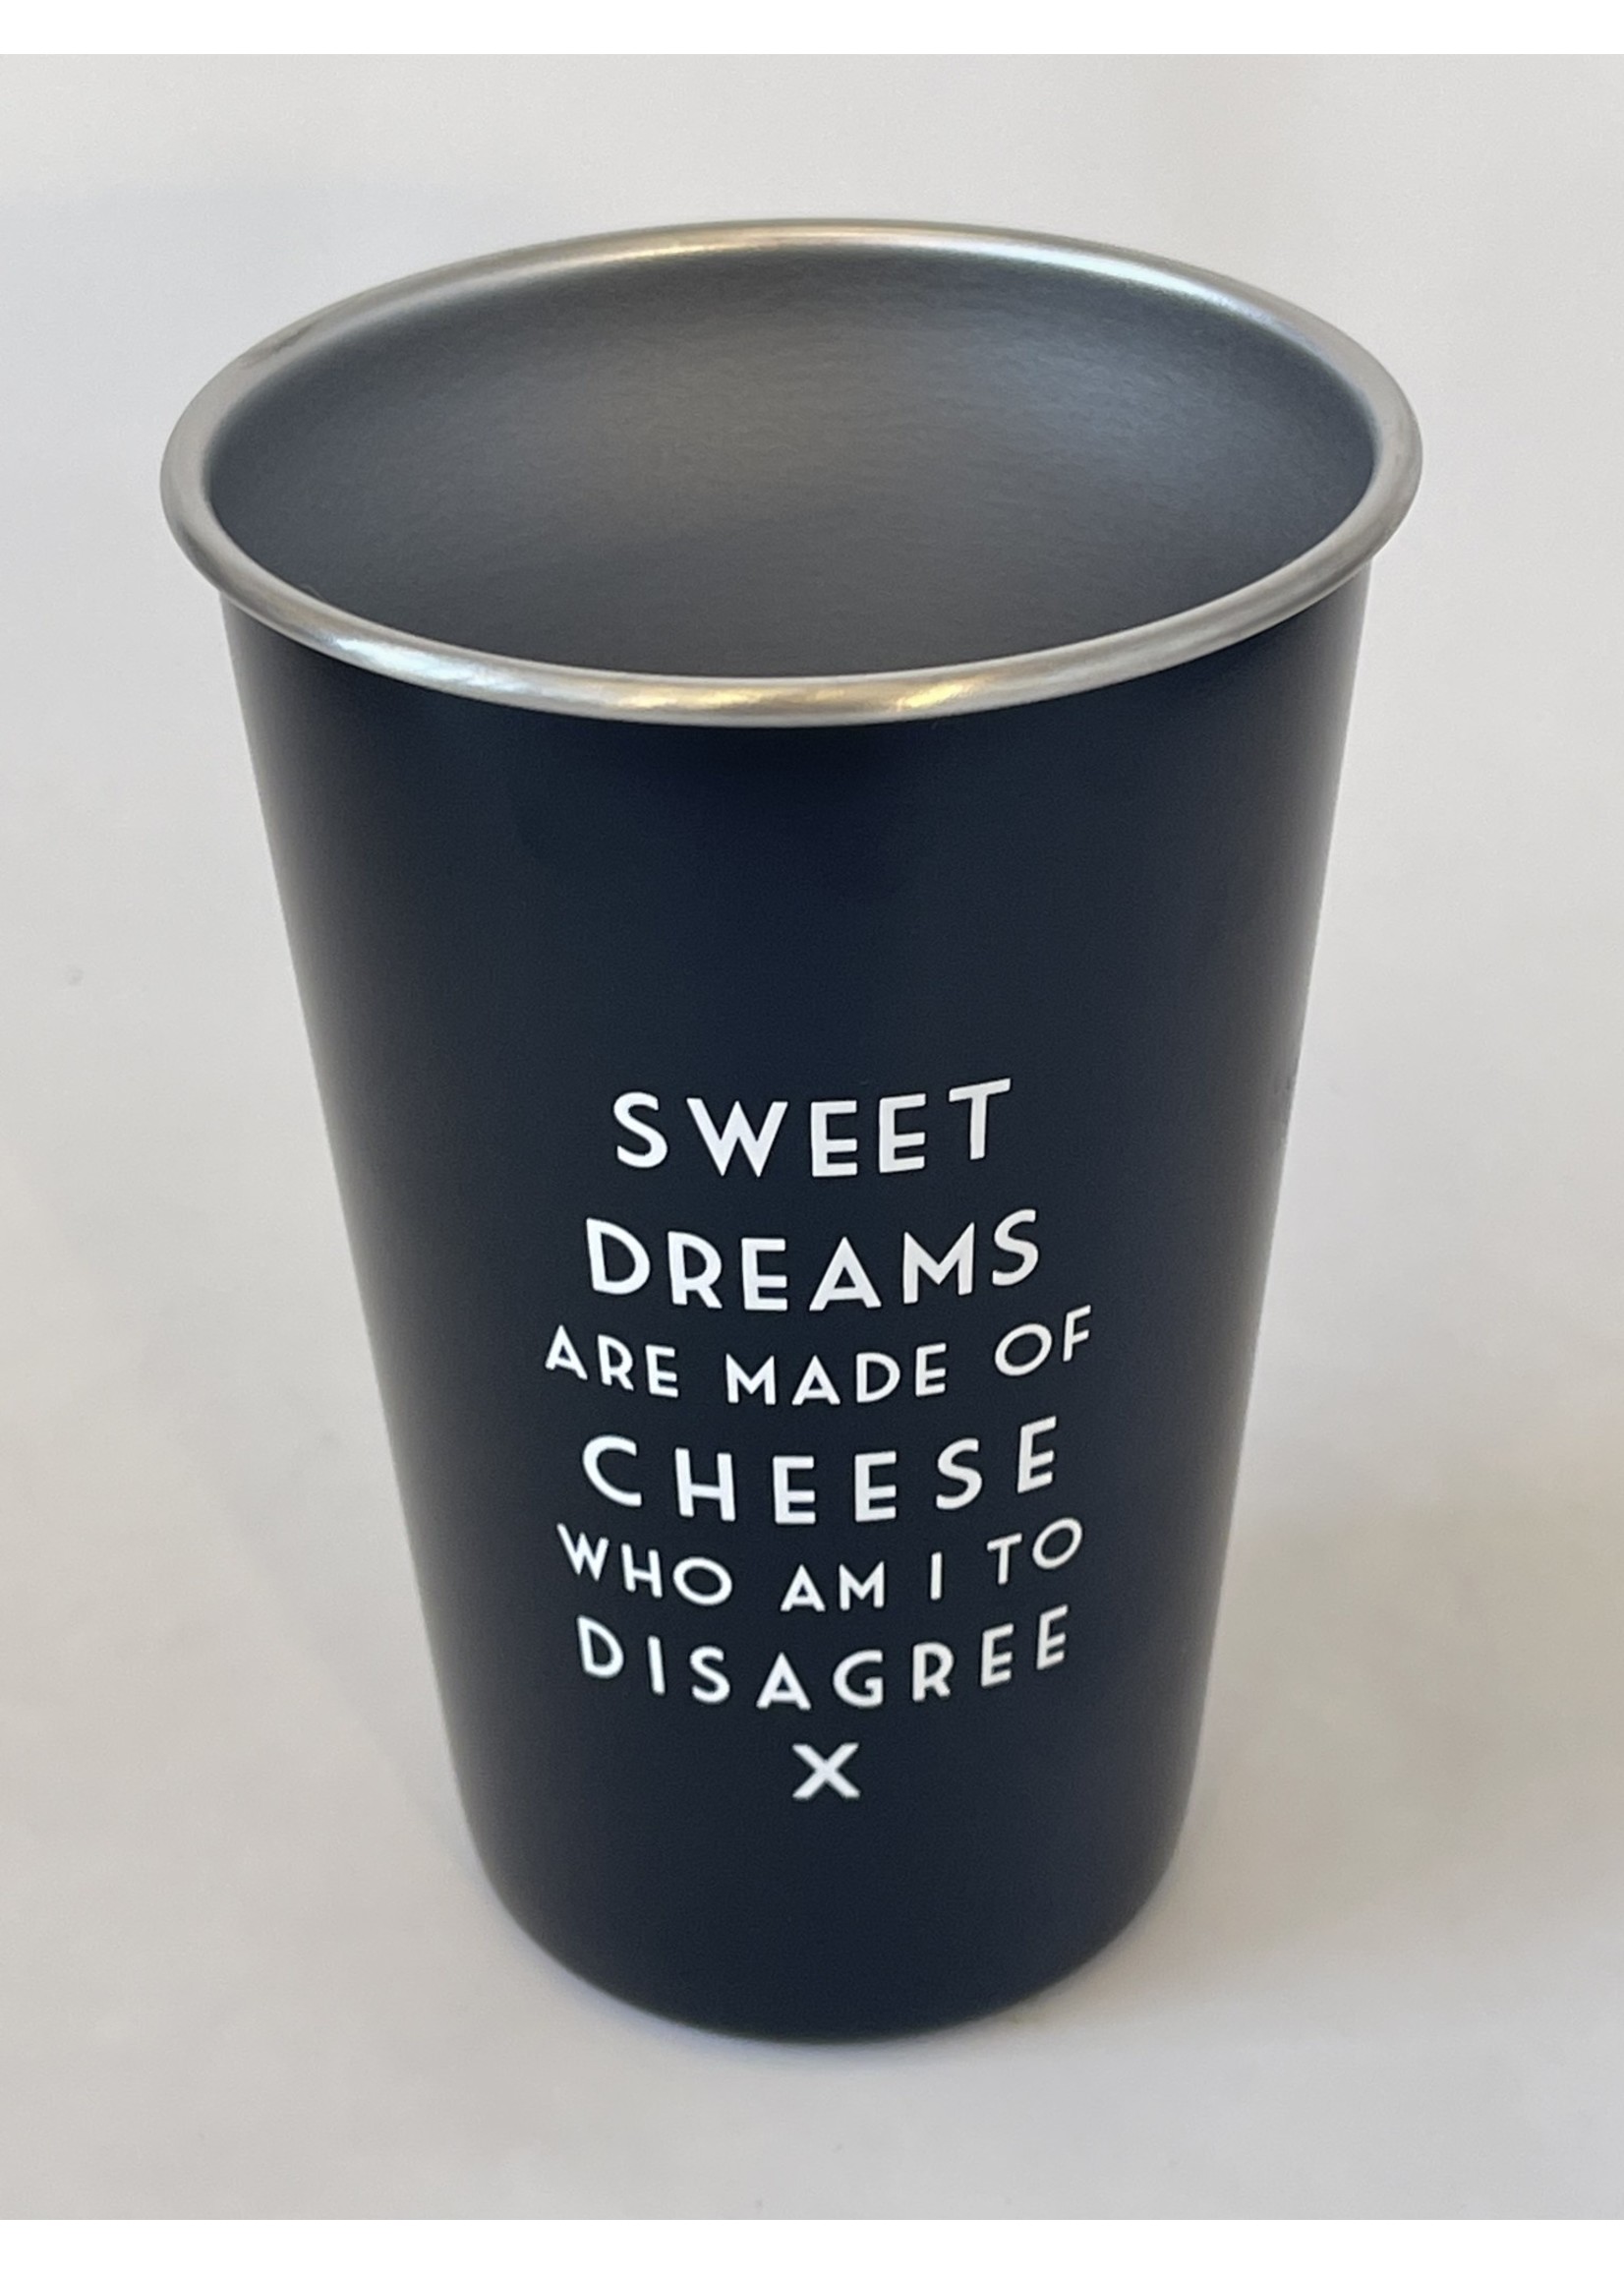 Meriwether Sweet Dreams are Made of Cheese Tumbler - Misquoted Song Lyrics